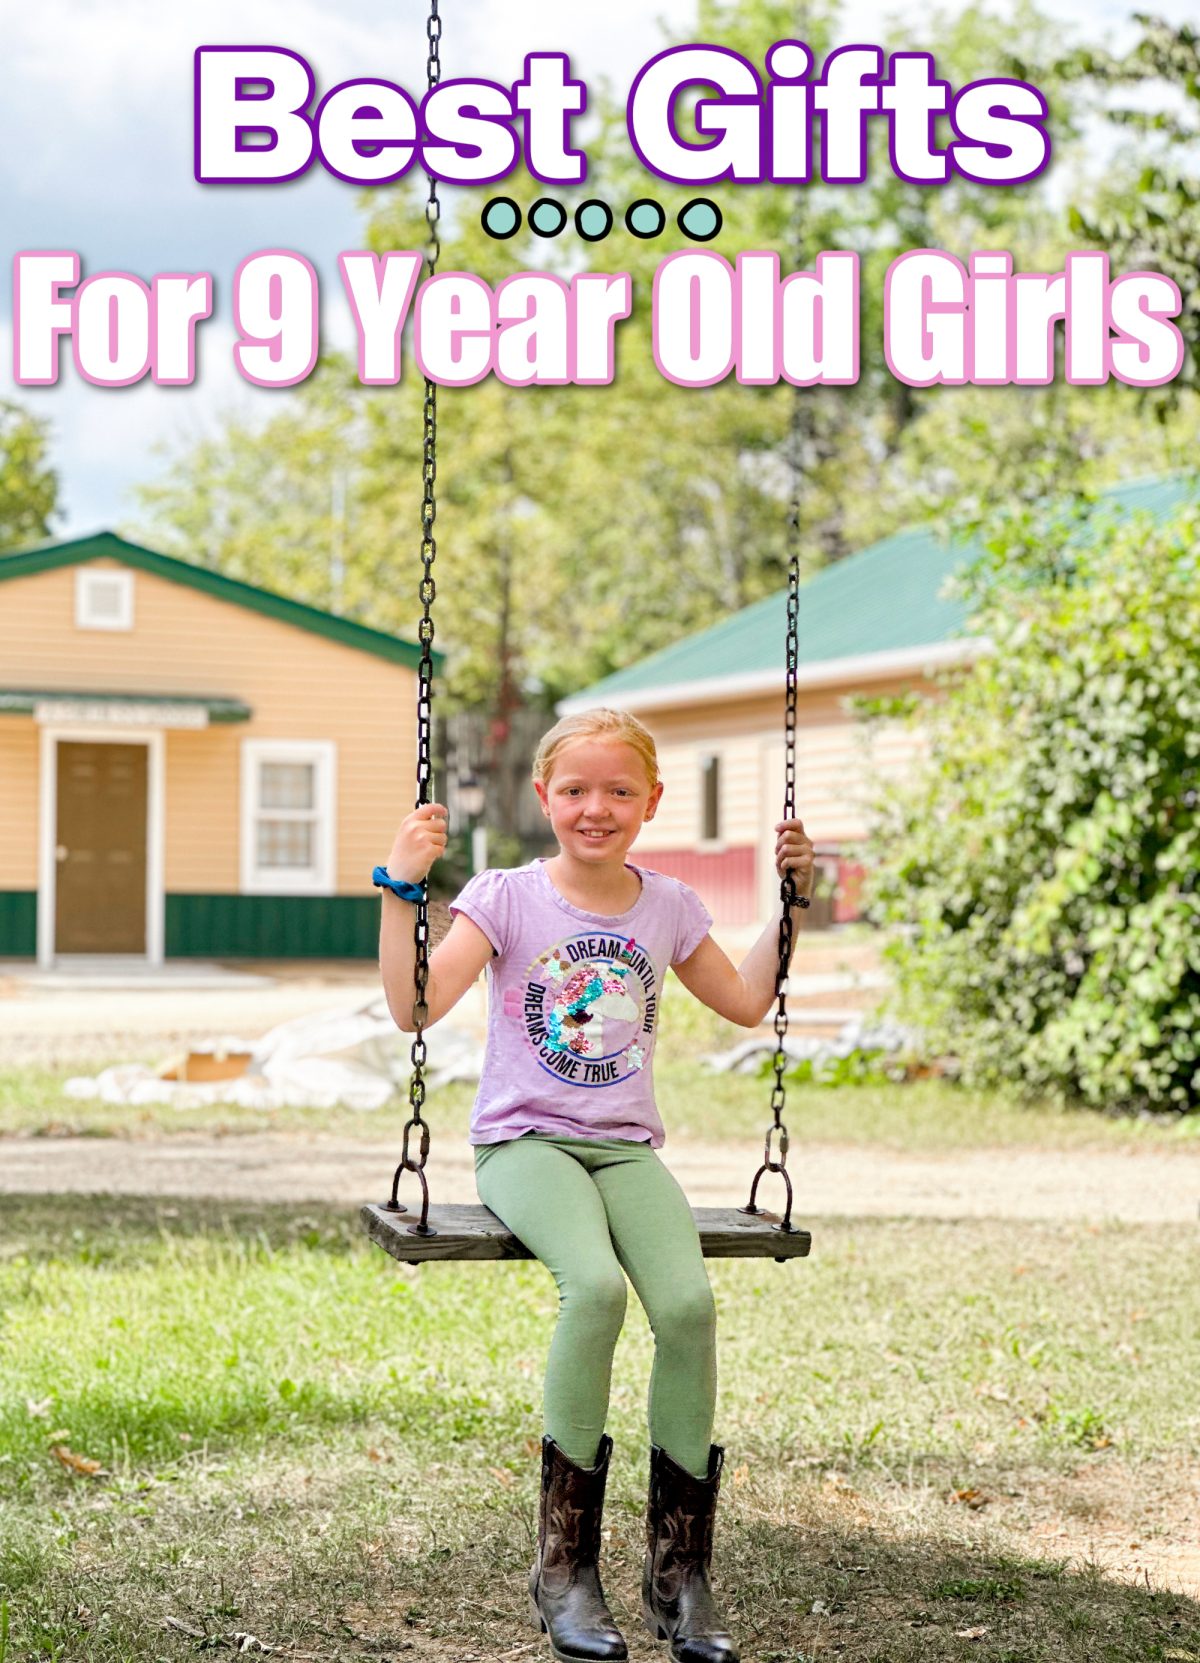 Best Gifts For 9 Year Old Girls (2)